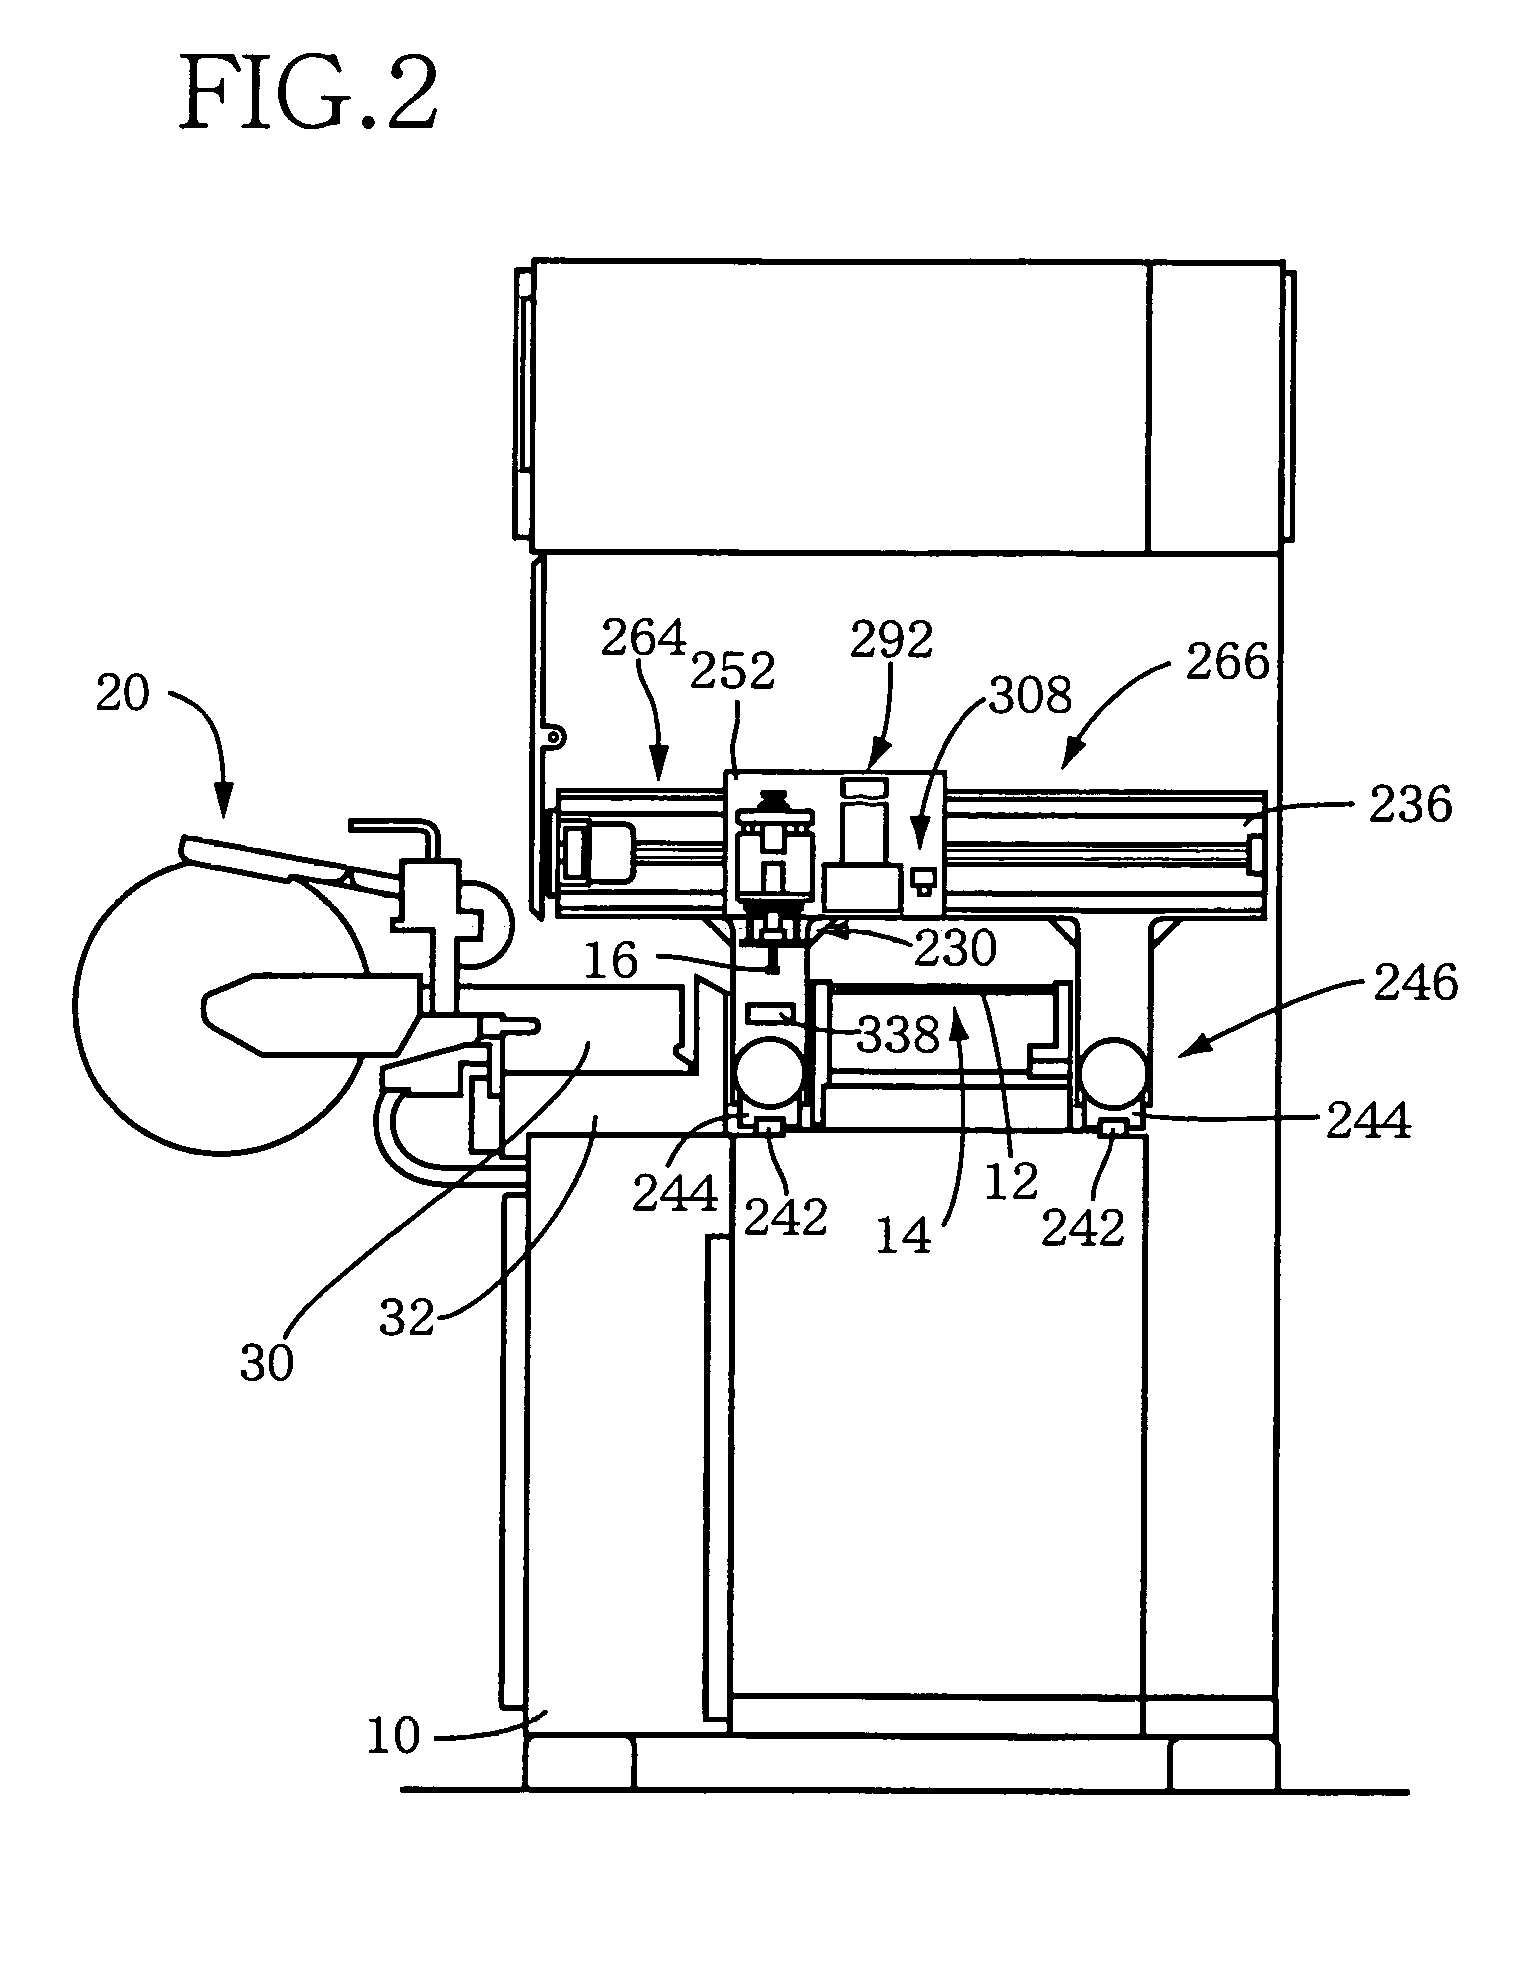 Working system for circuit substrate